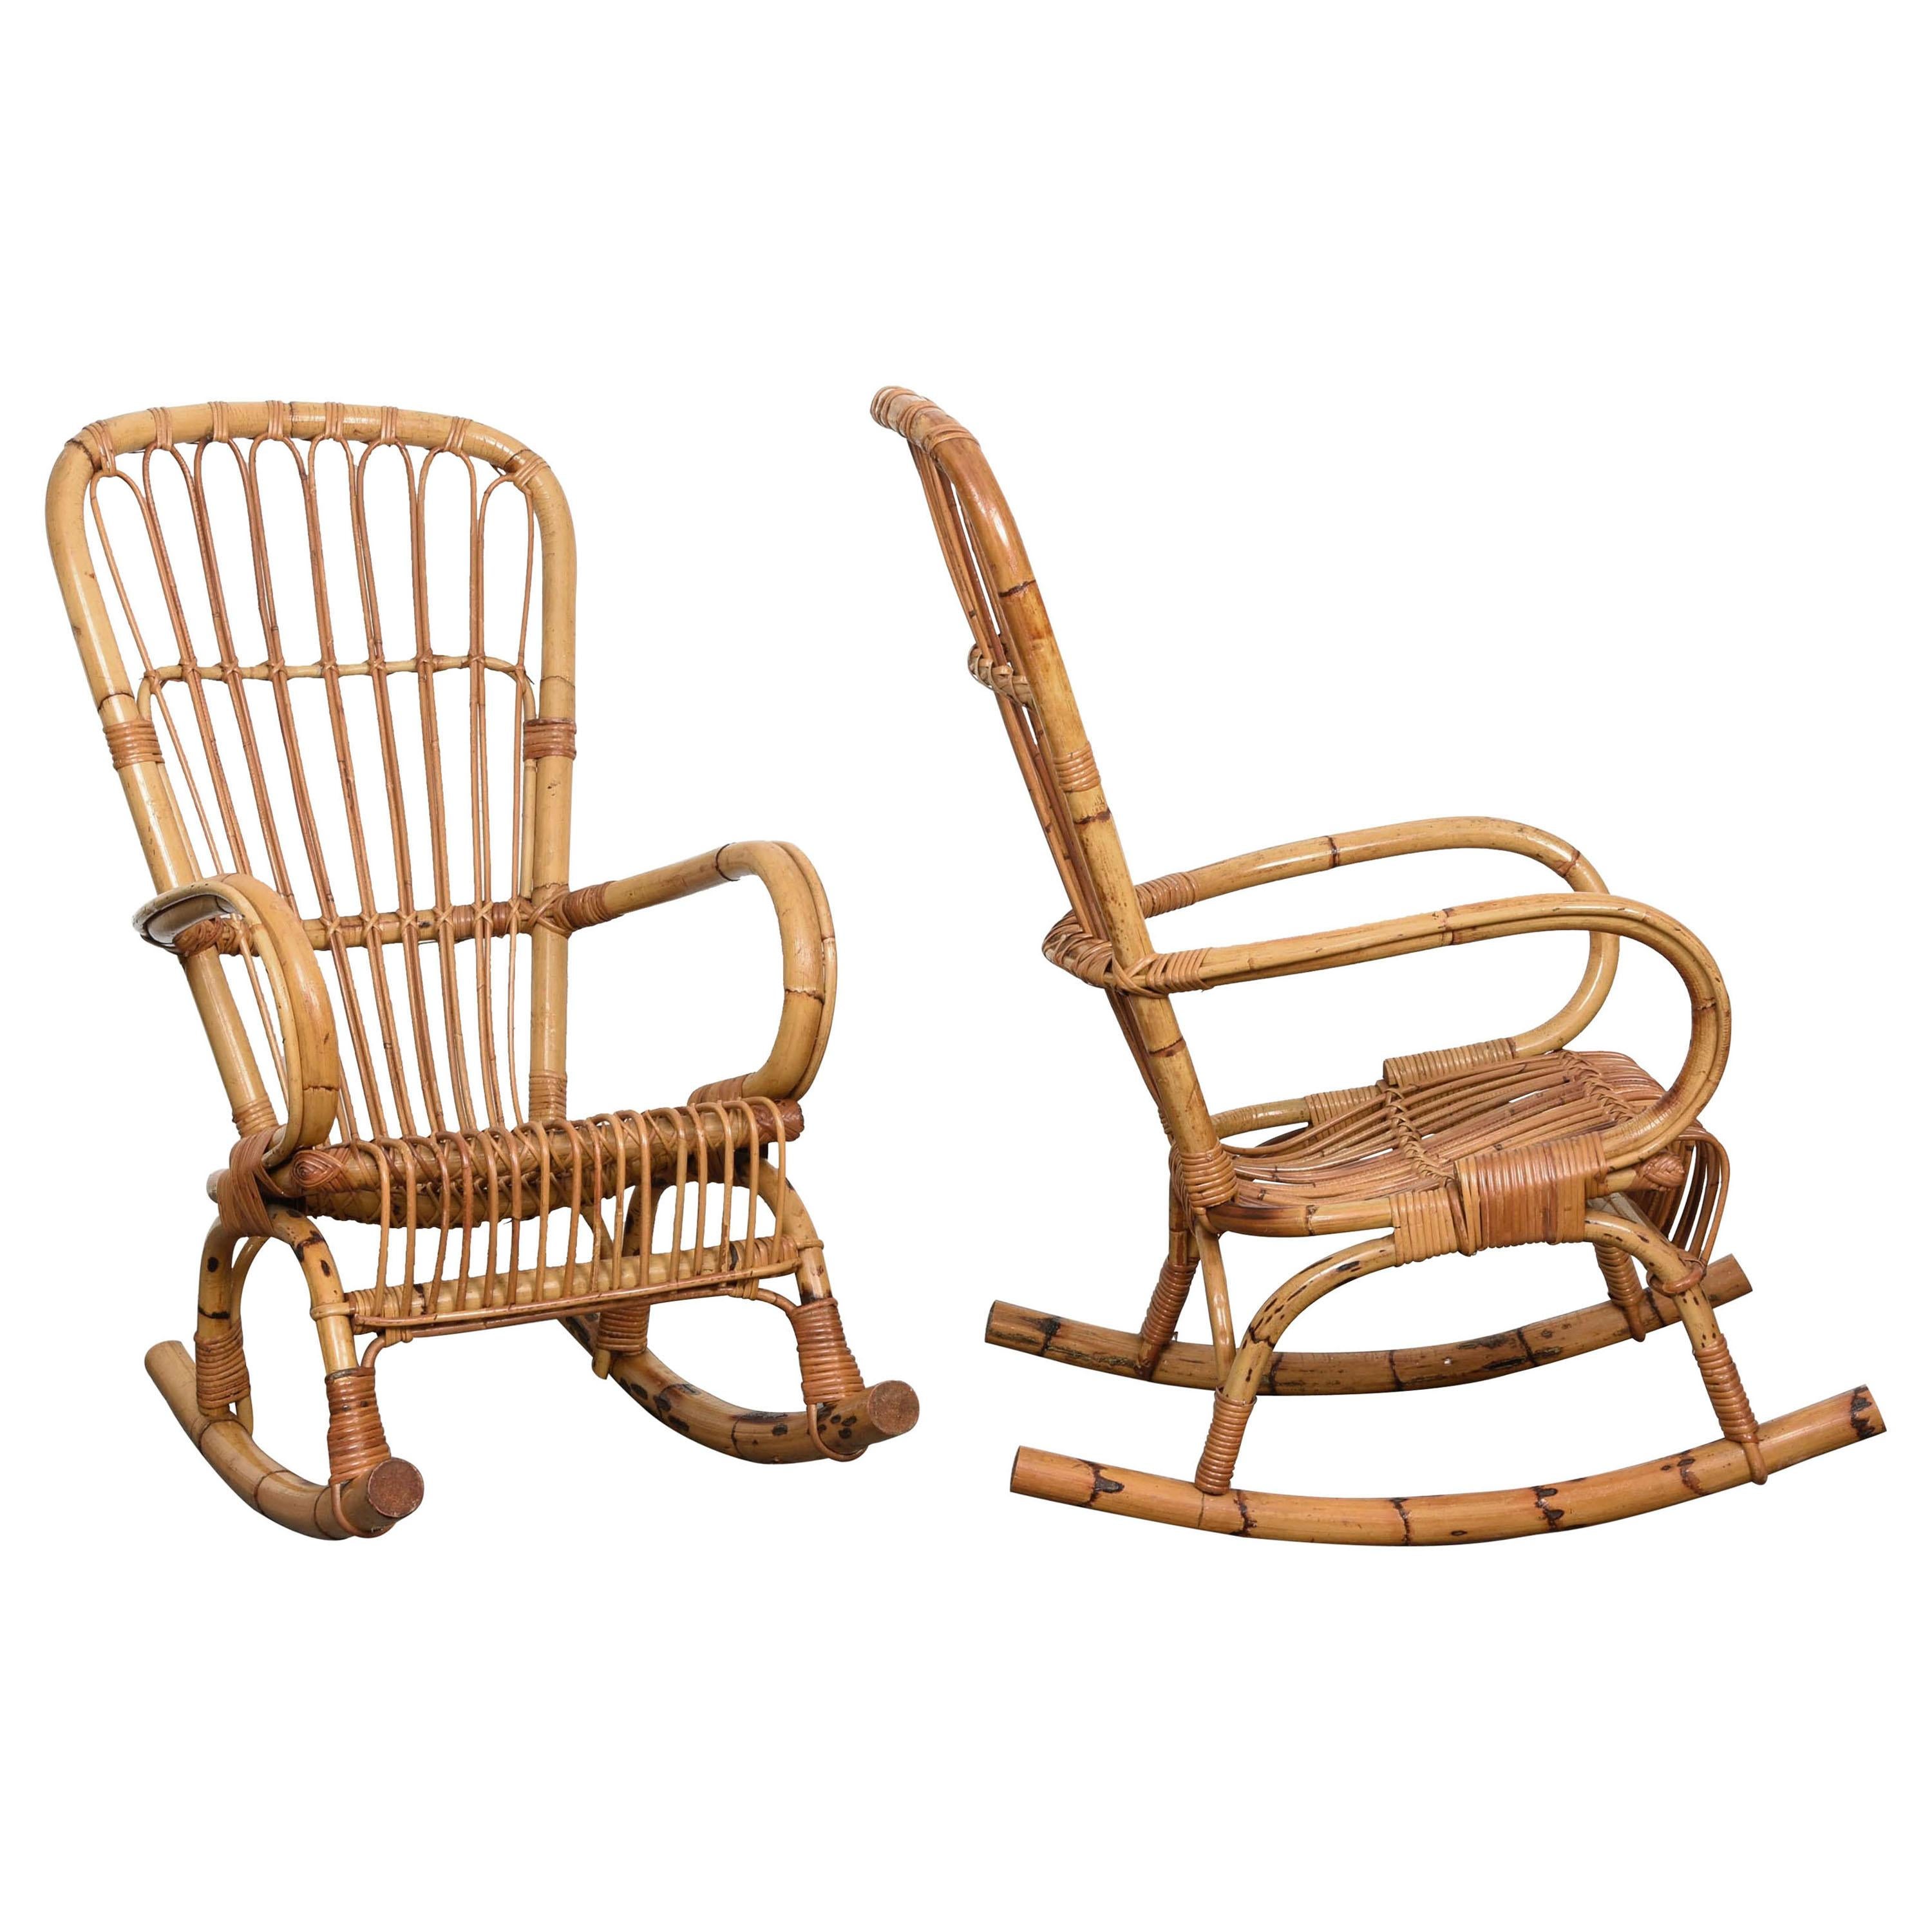 Pair of Midcentury Cote d'Azur Rattan and Bamboo Italian Rocking Chairs, 1960s